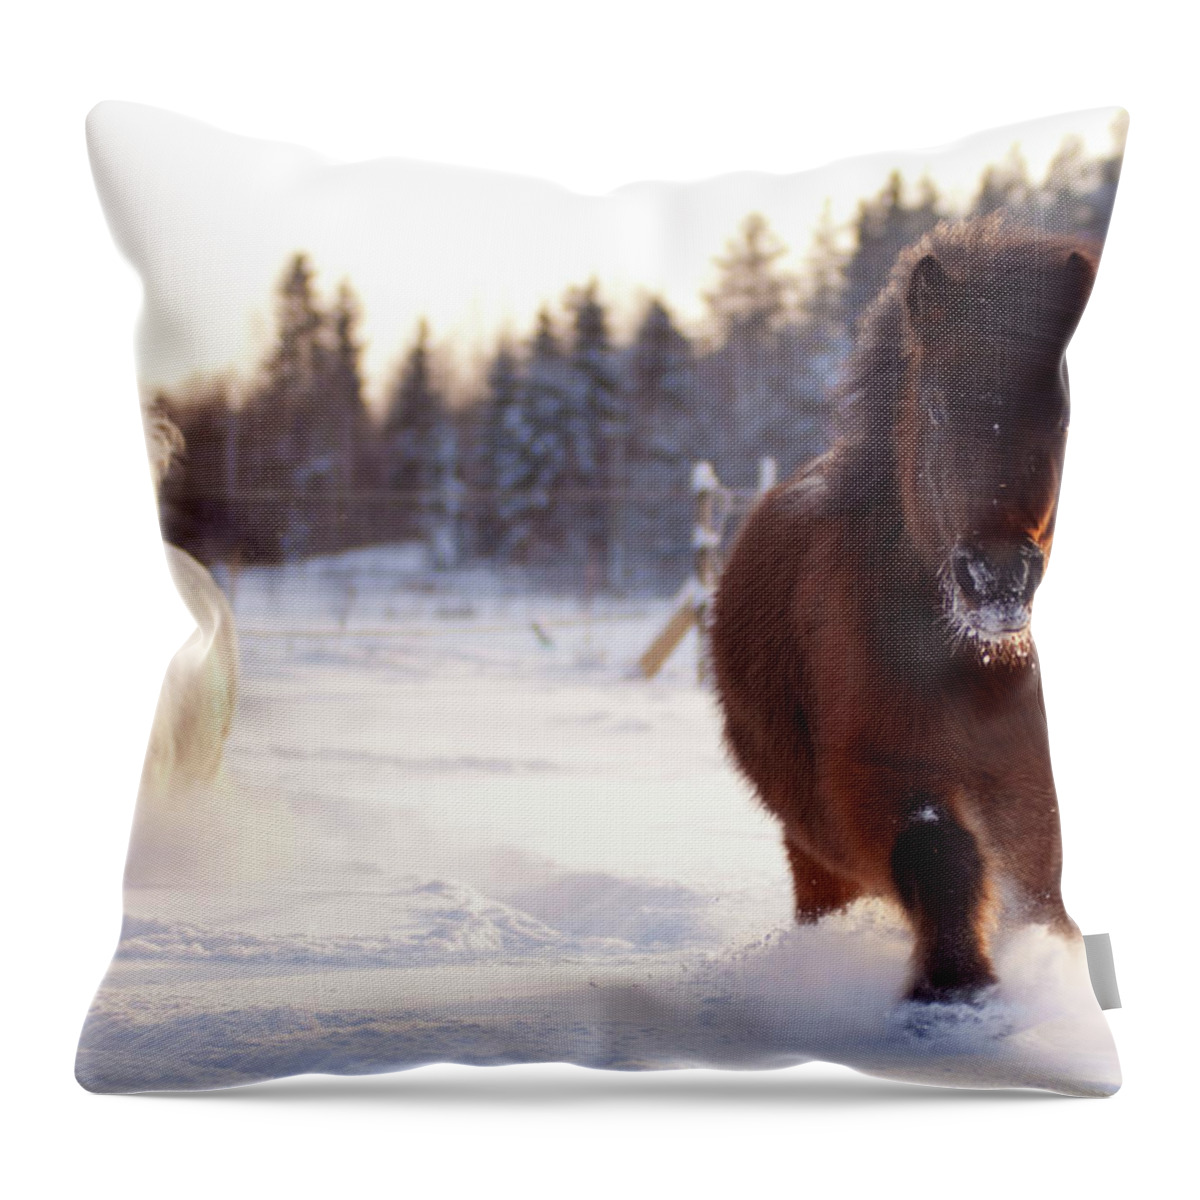 Snow Throw Pillow featuring the photograph Shetland Ponies Trotting In Snow by Satu Pitkänen